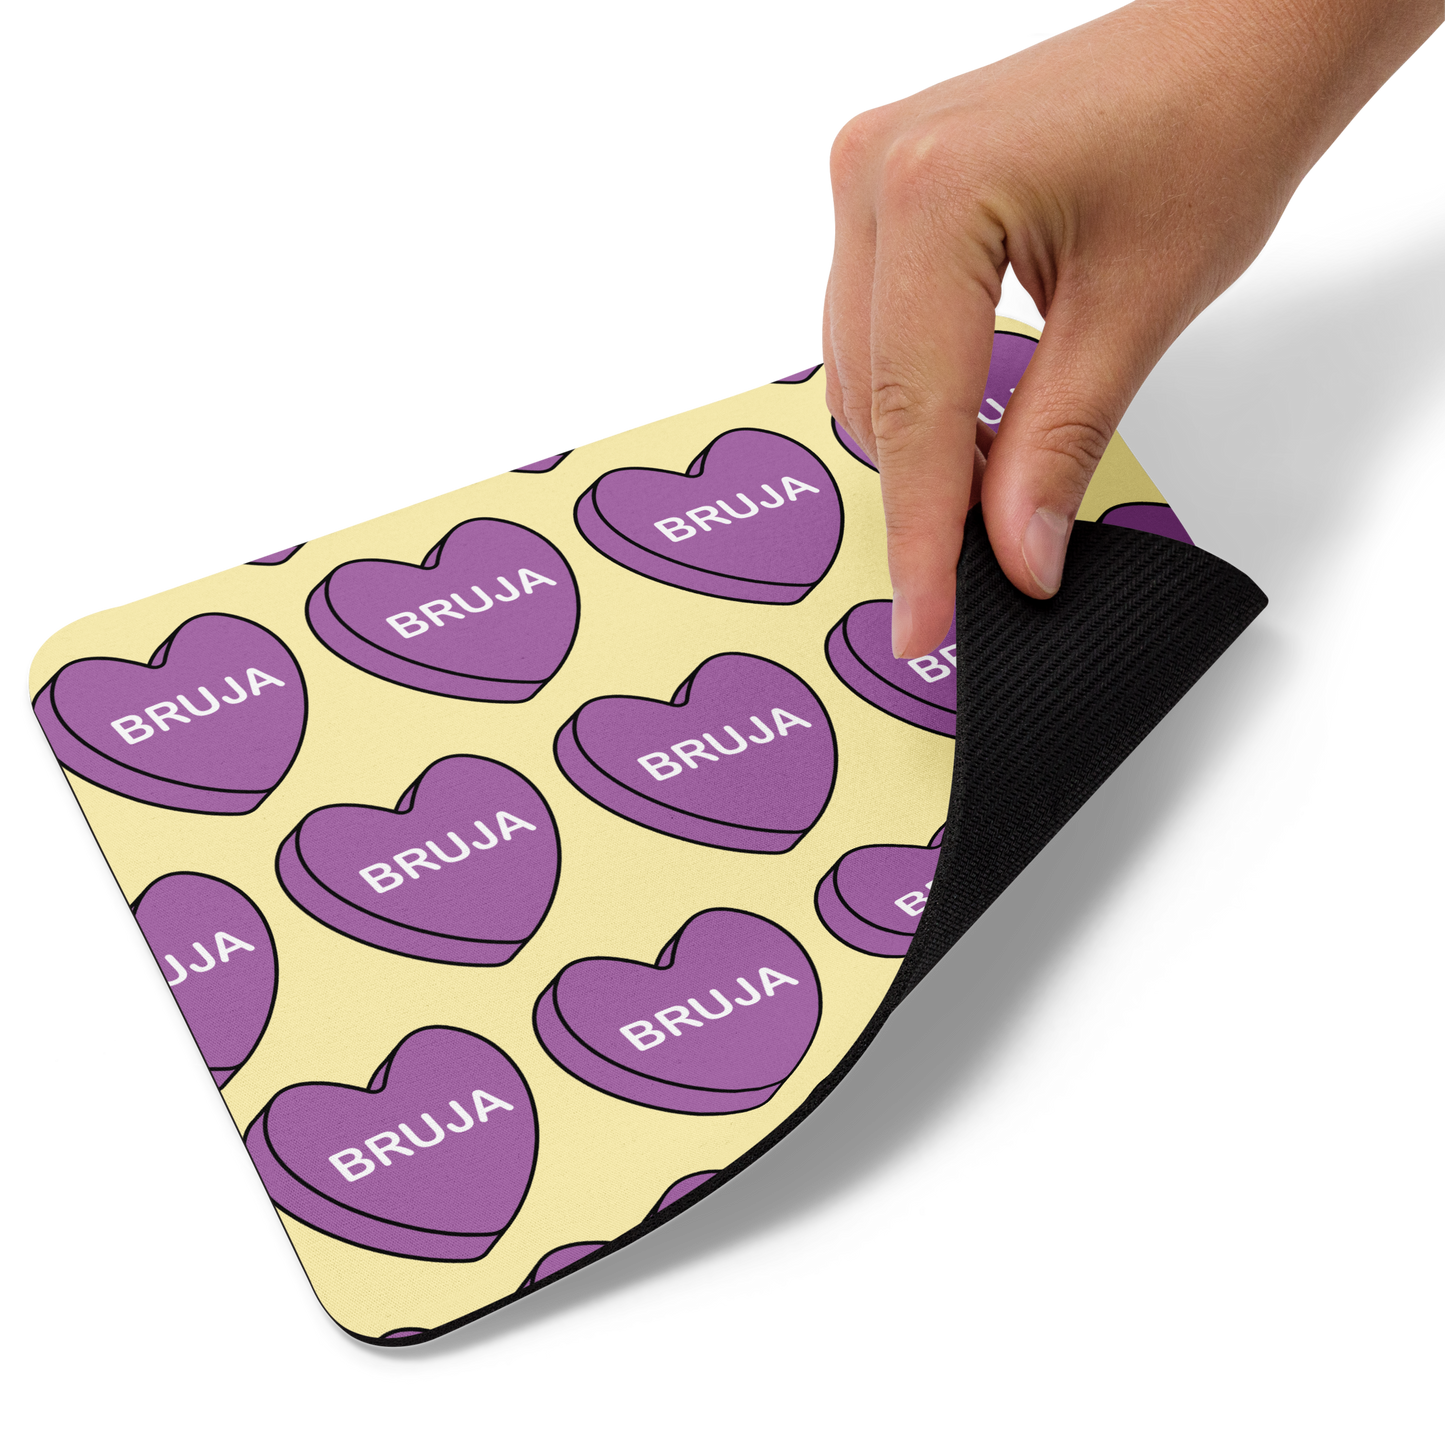 Bruja Candy Conversation Heart - Mouse pad